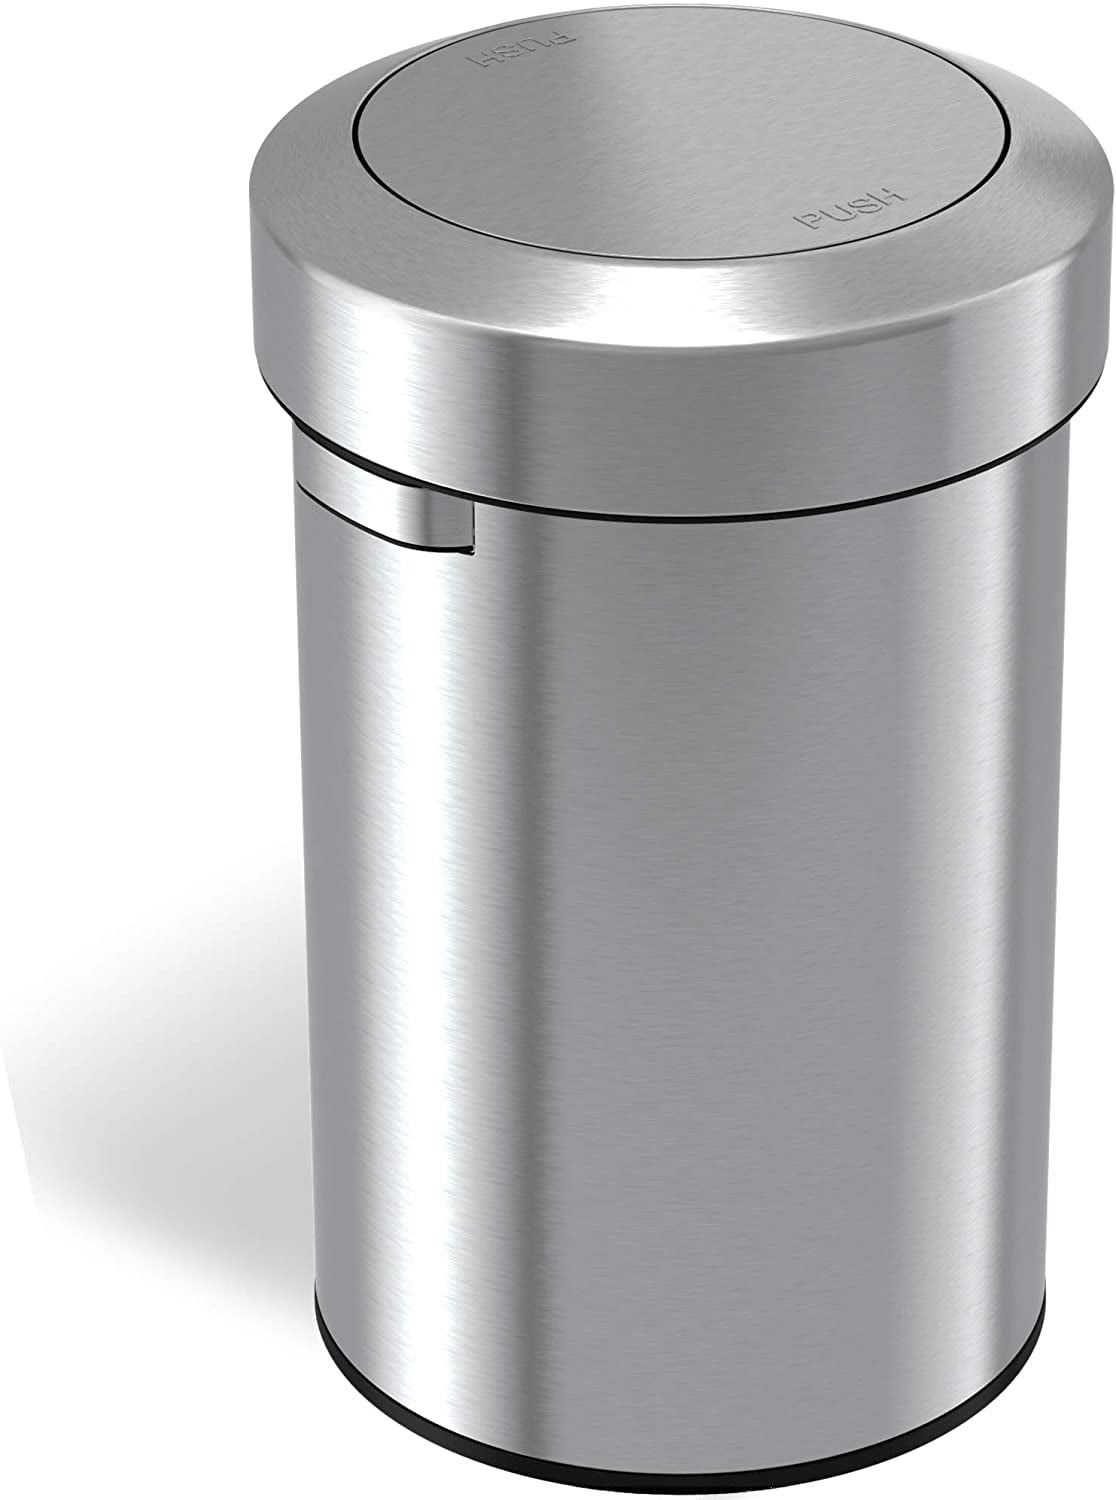 iTouchless Titan 17 Gallon Swing Open Trash Can, Stainless Steel Self Stainless Steel Flip Top Trash Can